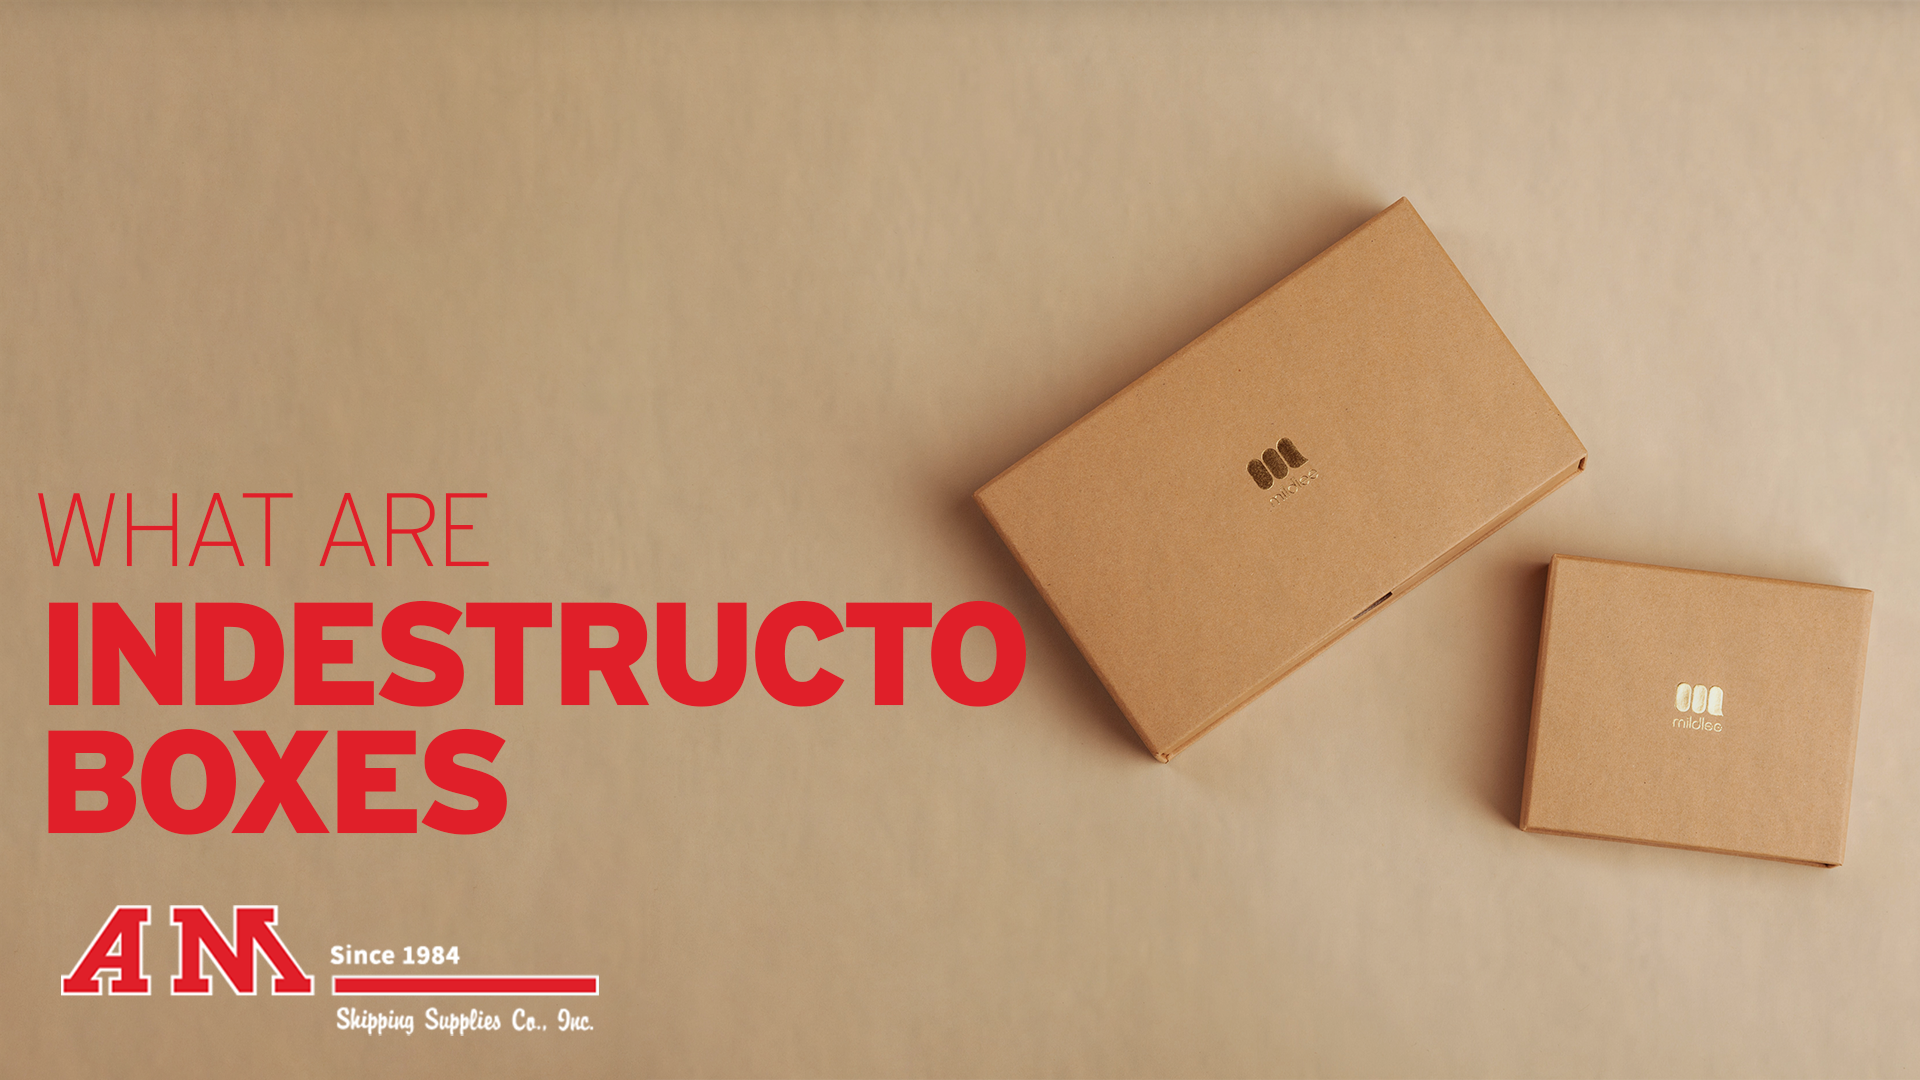 What Are Indestructo Boxes?